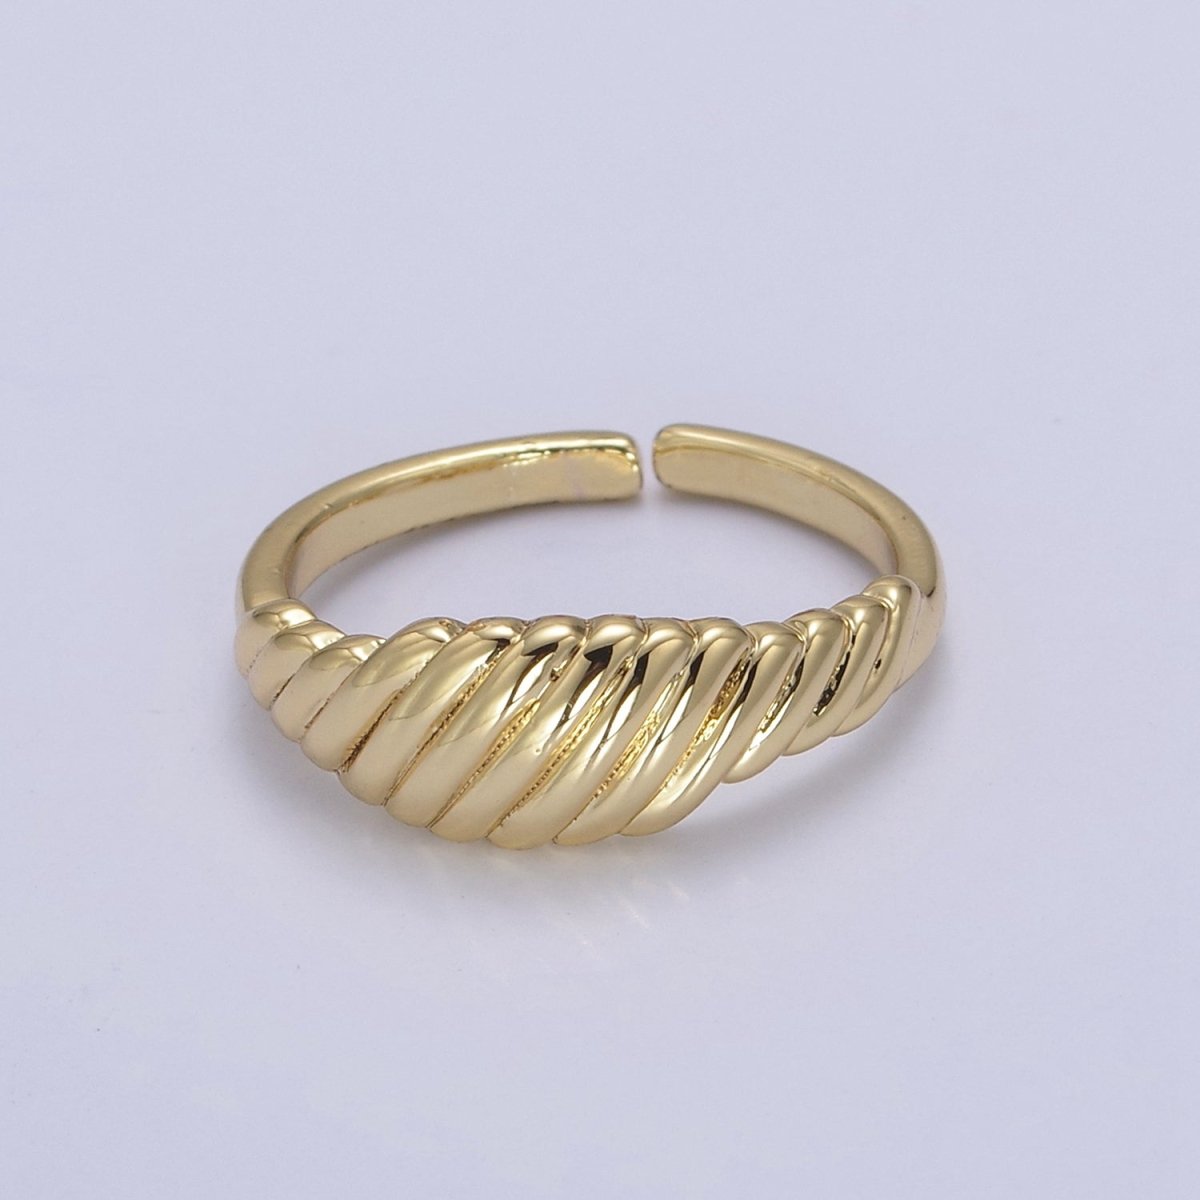 24K Gold Filled Textured Croissant Adjustable Ring, Minimalist Everyday Dome Golden Ring S-326 - DLUXCA